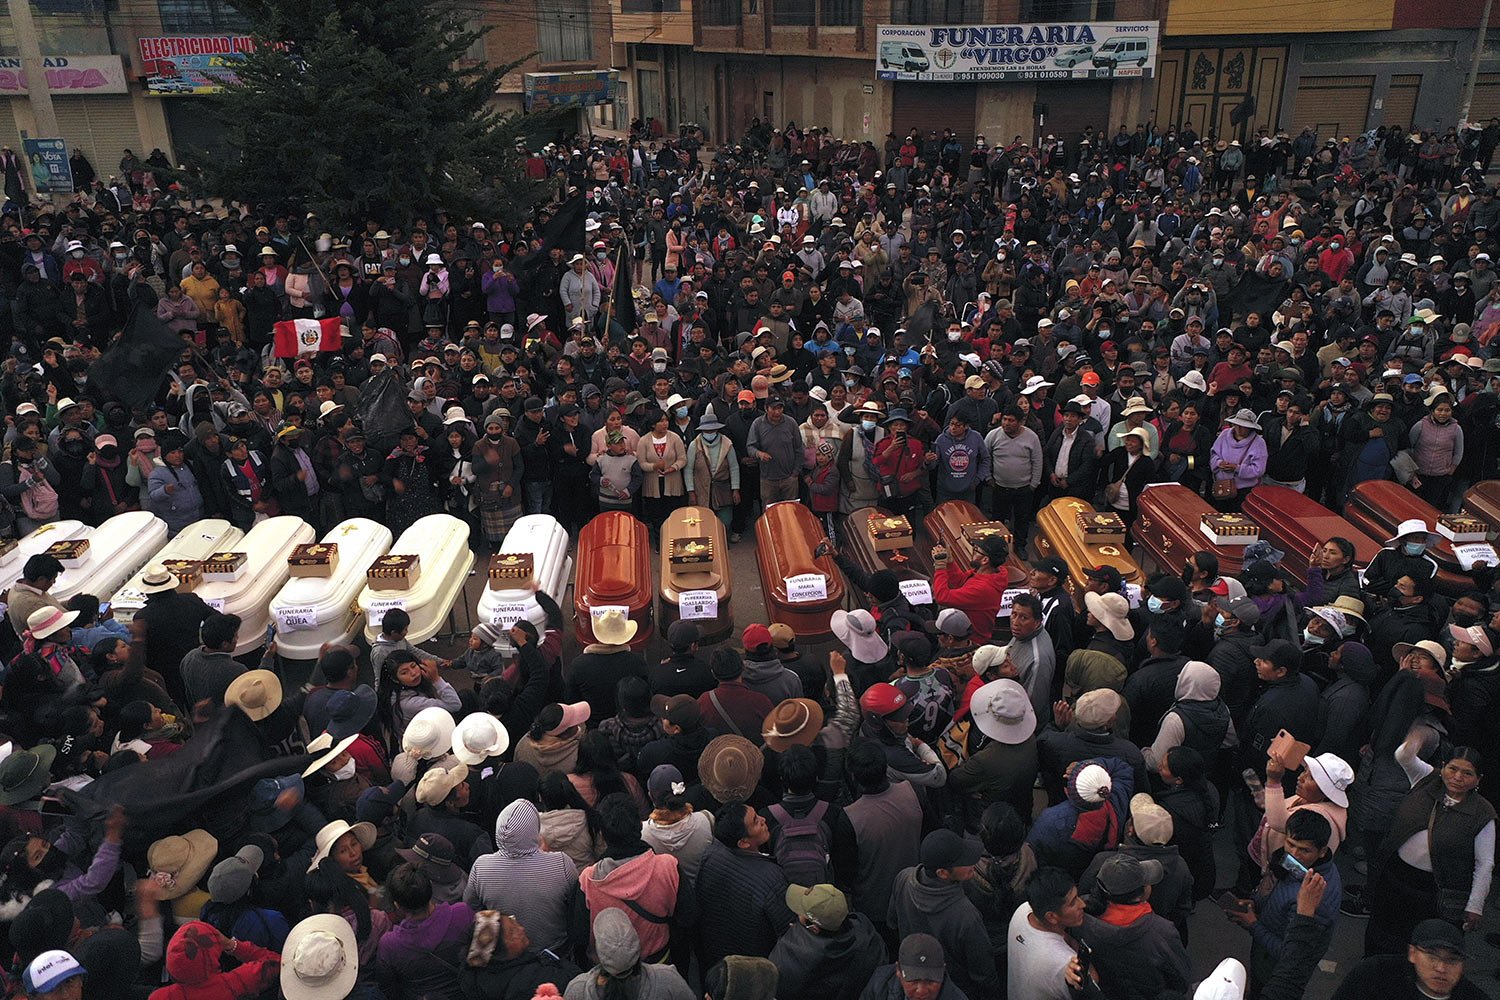  Residents surround coffins during a wake for the people who died during political unrest in Juliaca, Peru, Jan. 10, 2023. At least 17 people died in one day as protests seeking immediate elections resumed in rural areas of the country still loyal to